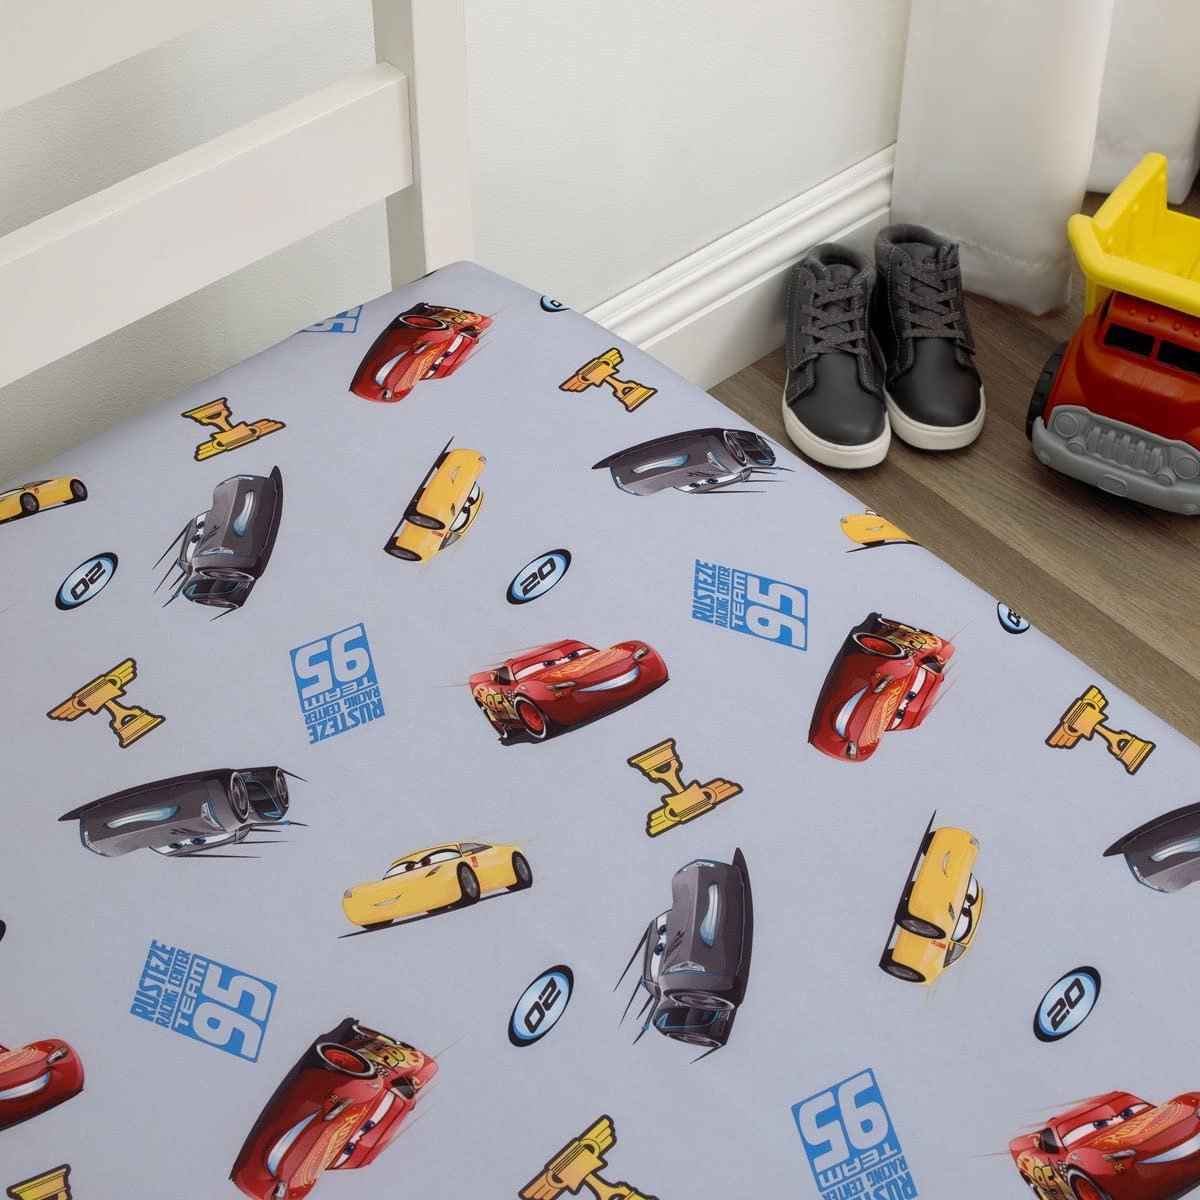 Disney Cars Fitted Crib Sheet 100% Soft Breathable Microfiber, Baby Sheet, Fits Standard Size Crib Mattress 28in x 52in - image 3 of 3